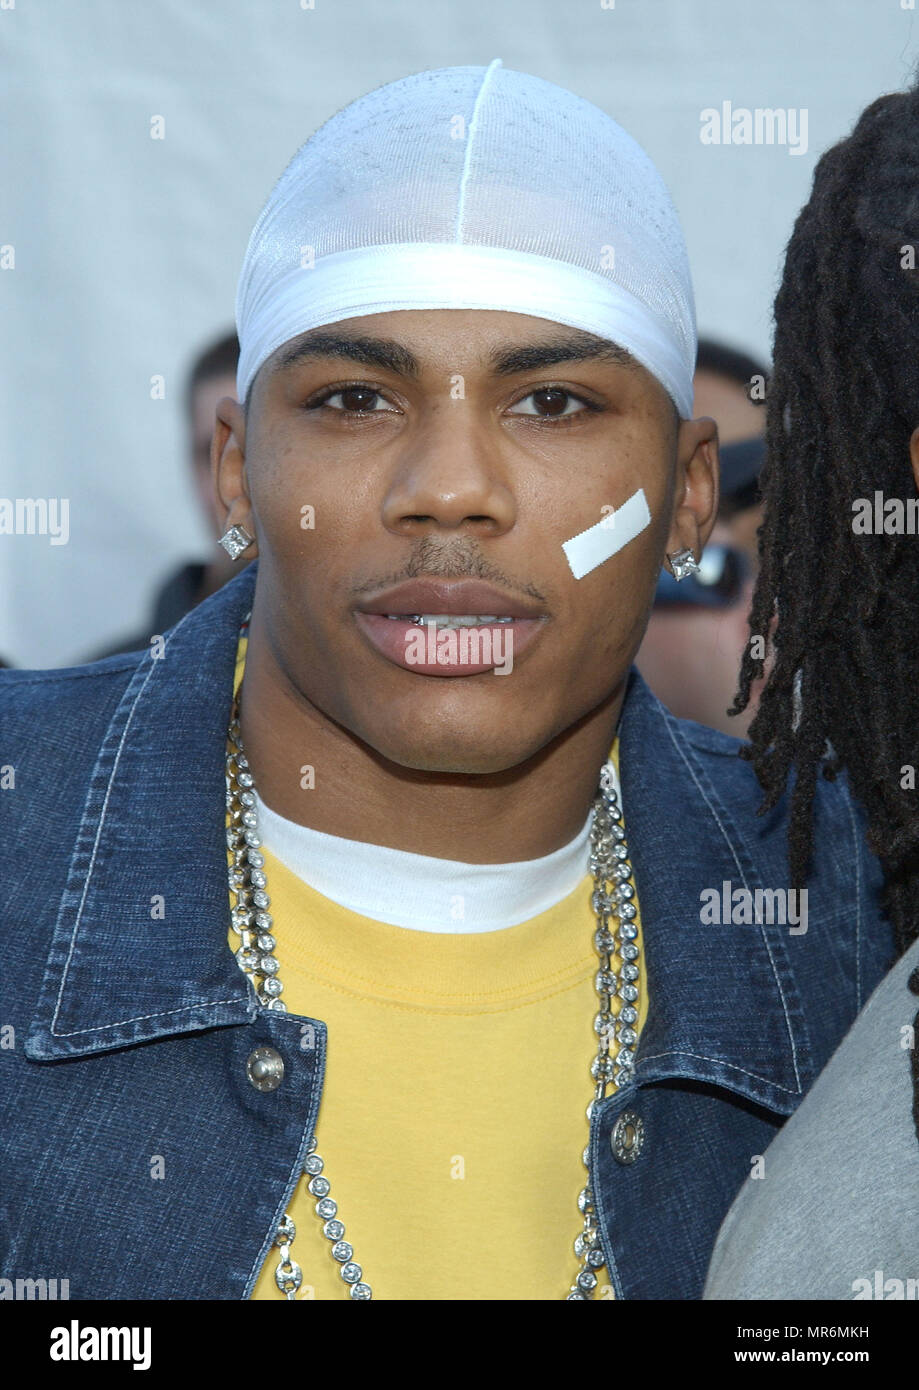 Nelly arrives at the 30th Annual AMAs held at the Shrine Auditorium in Los Angeles, CA, January 13, 2003.  Nelly01B Red Carpet Event, Vertical, USA, Film Industry, Celebrities,  Photography, Bestof, Arts Culture and Entertainment, Topix Celebrities fashion /  Vertical, Best of, Event in Hollywood Life - California,  Red Carpet and backstage, USA, Film Industry, Celebrities,  movie celebrities, TV celebrities, Music celebrities, Photography, Bestof, Arts Culture and Entertainment,  Topix, headshot, vertical, one person,, from the year , 2002, inquiry tsuni@Gamma-USA.com Stock Photo